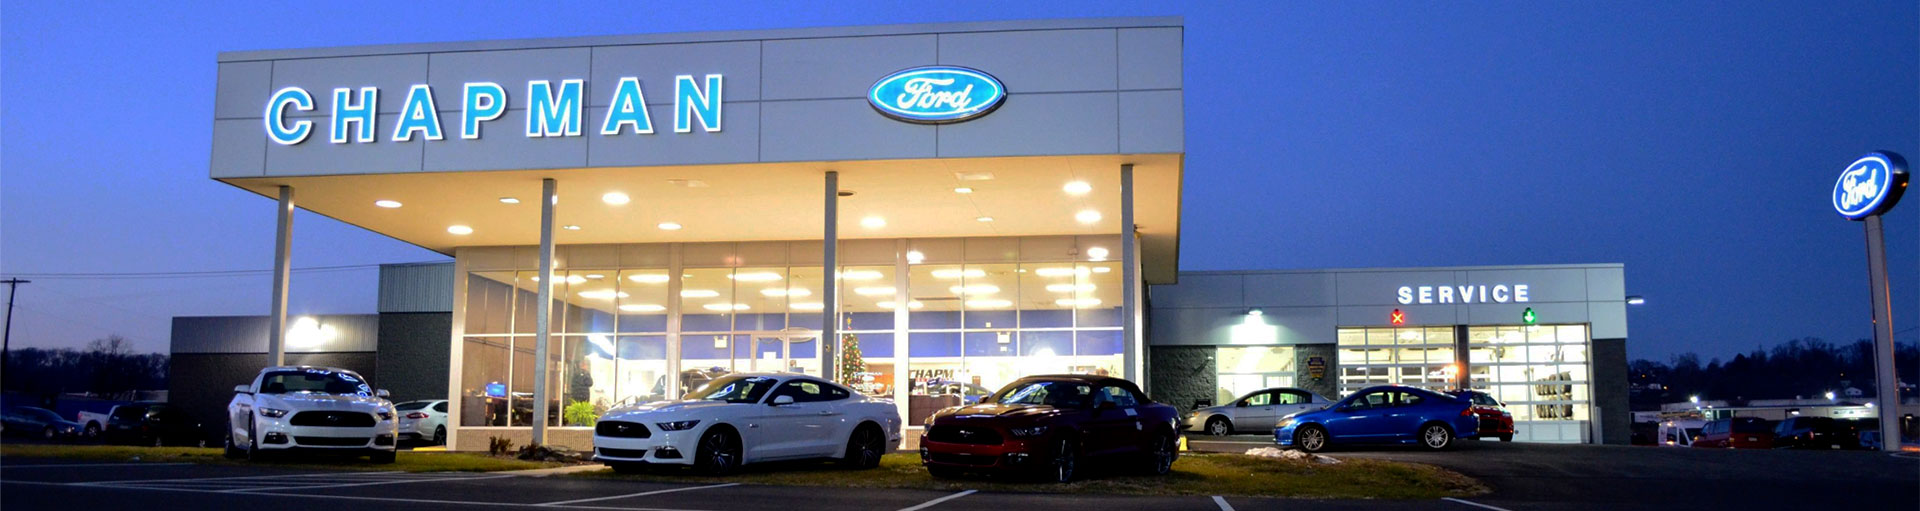 Chapman Ford Tire Department